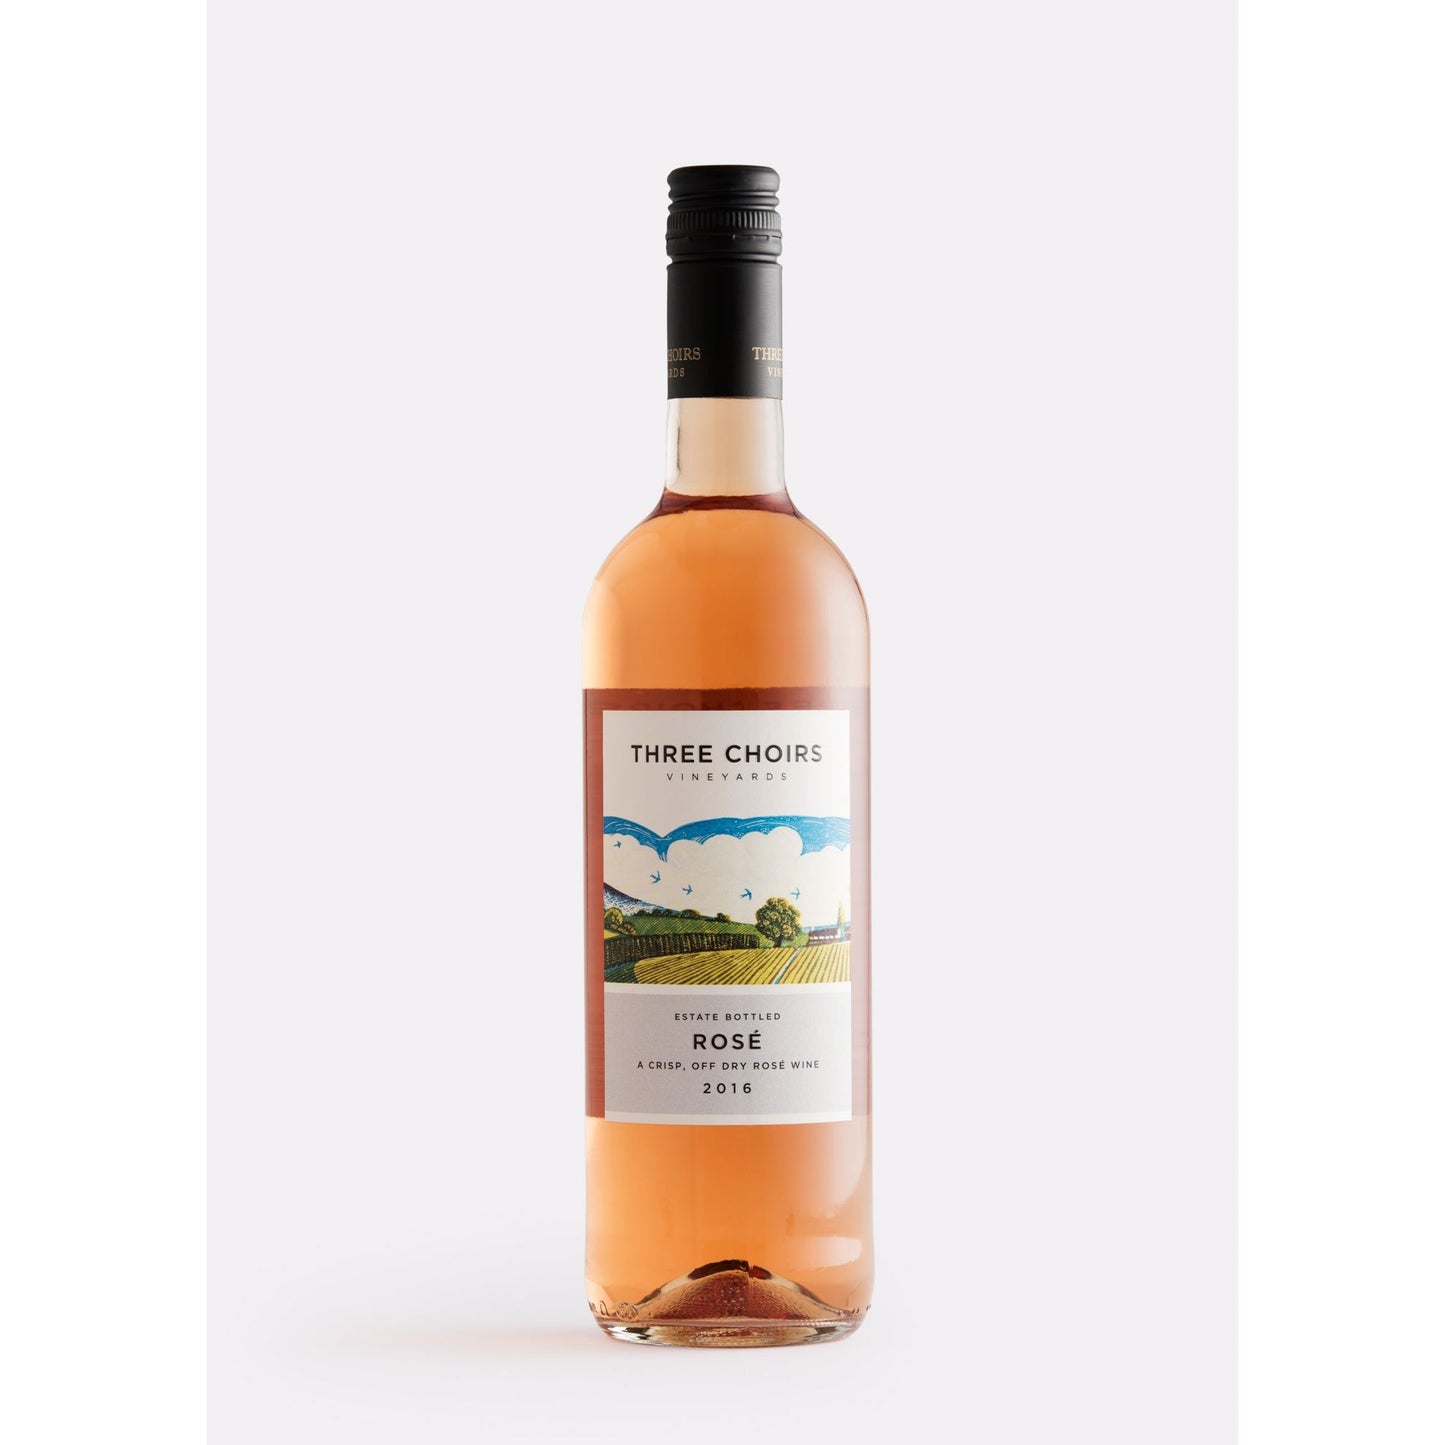 Three Choirs Rosé wine The English Wine Collection